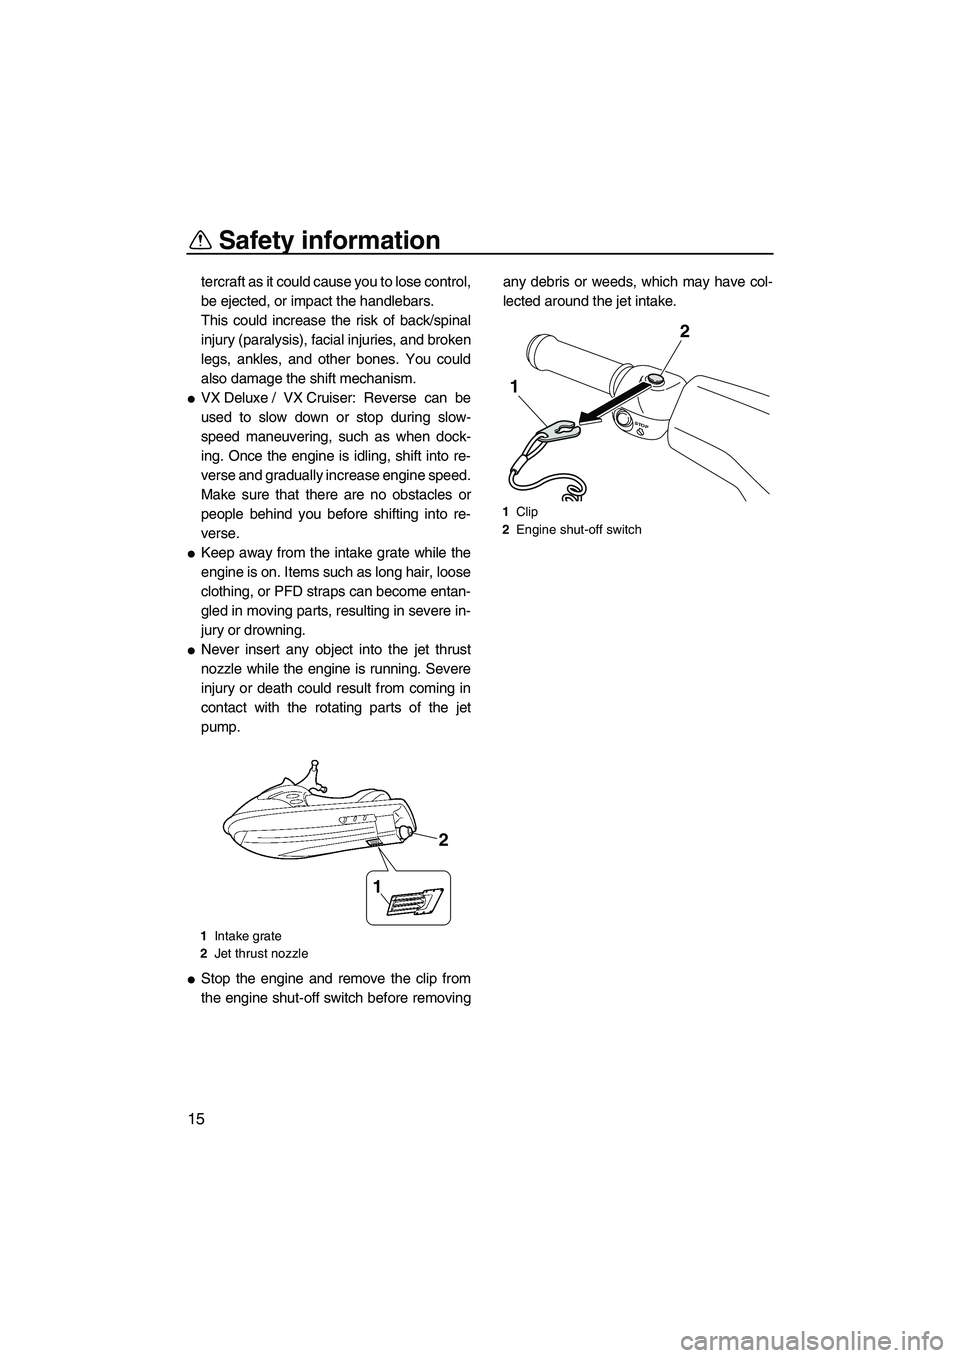 YAMAHA VX SPORT 2010 Owners Manual Safety information
15
tercraft as it could cause you to lose control,
be ejected, or impact the handlebars.
This could increase the risk of back/spinal
injury (paralysis), facial injuries, and broken
